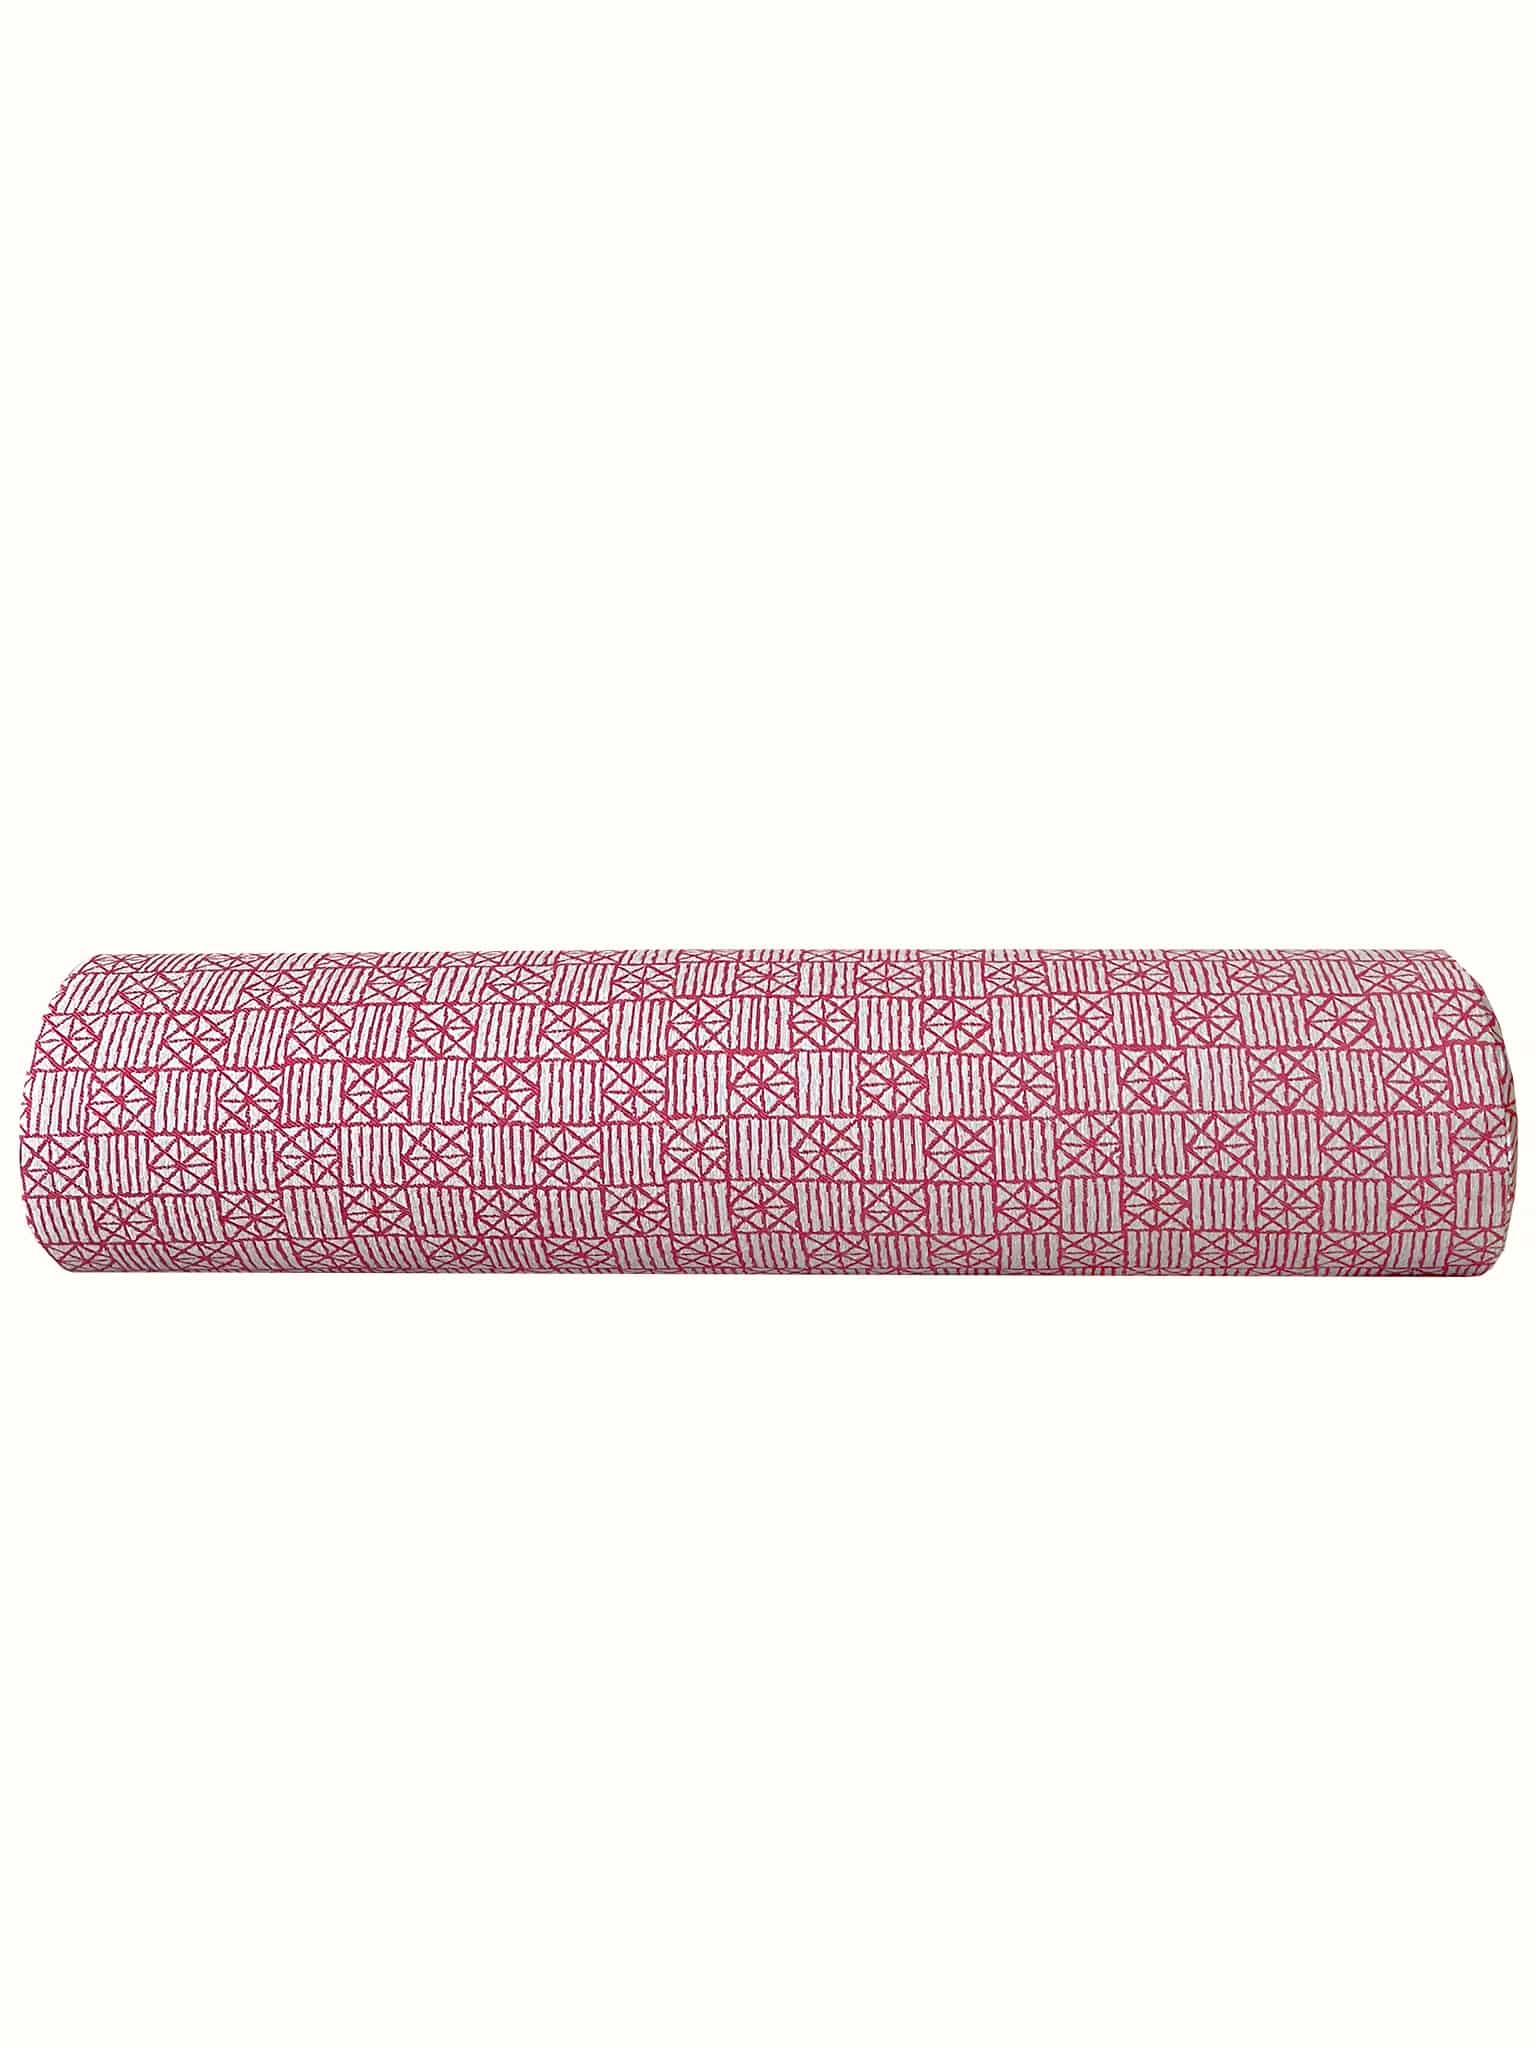 Geometrically patterned bolster pillow in red gives a modern flair at Cielle Home